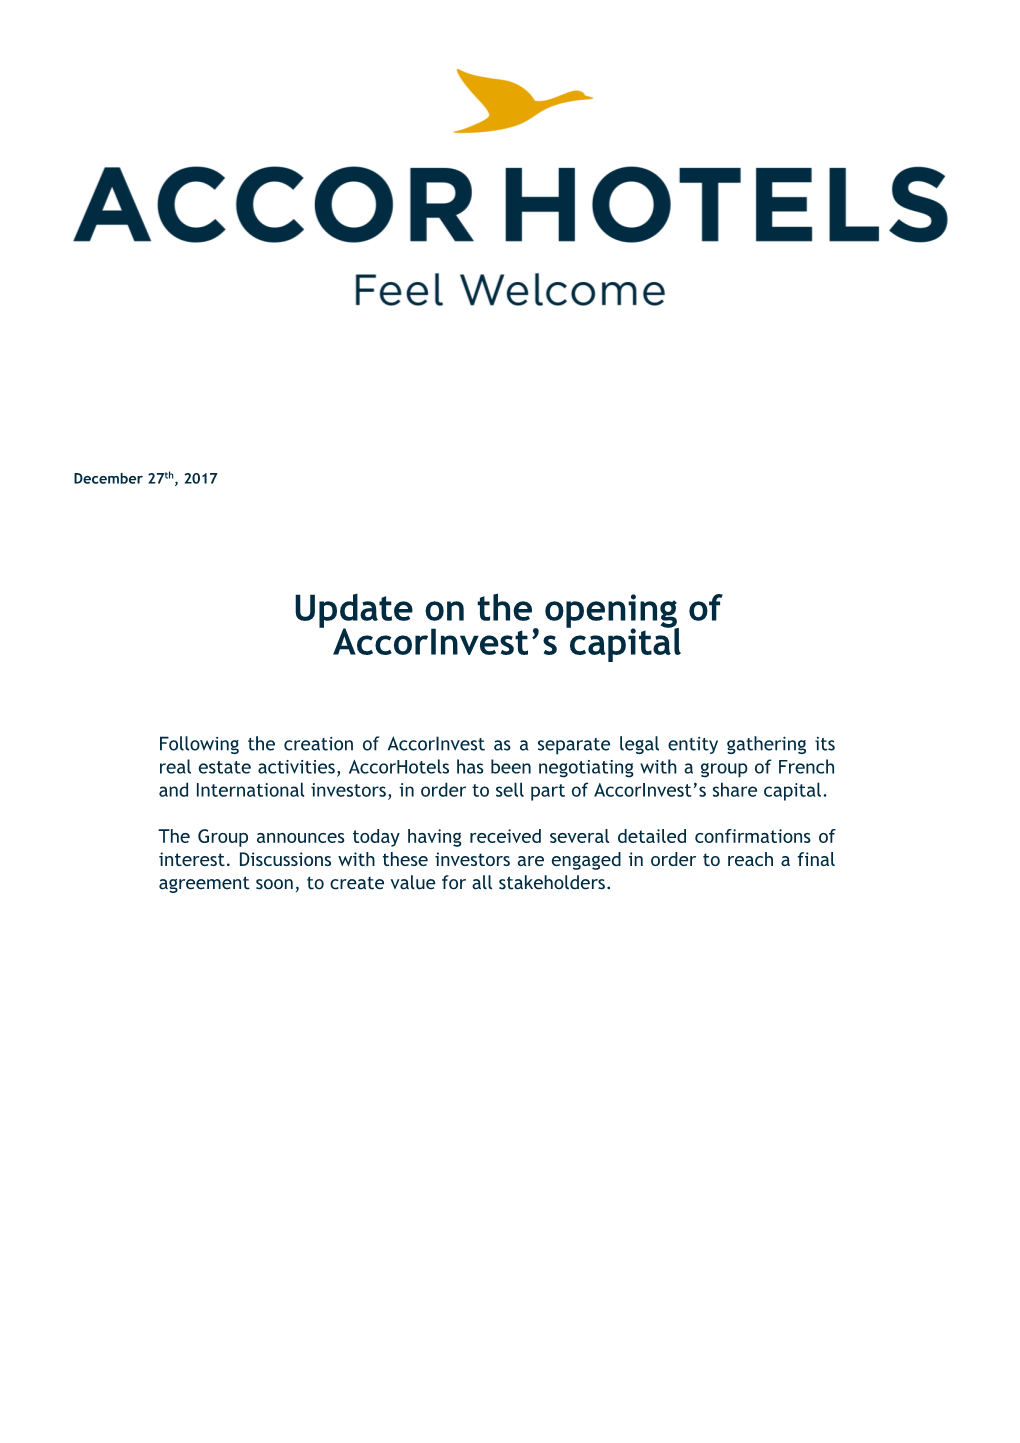 Update on the Opening of Accorinvest's Capital